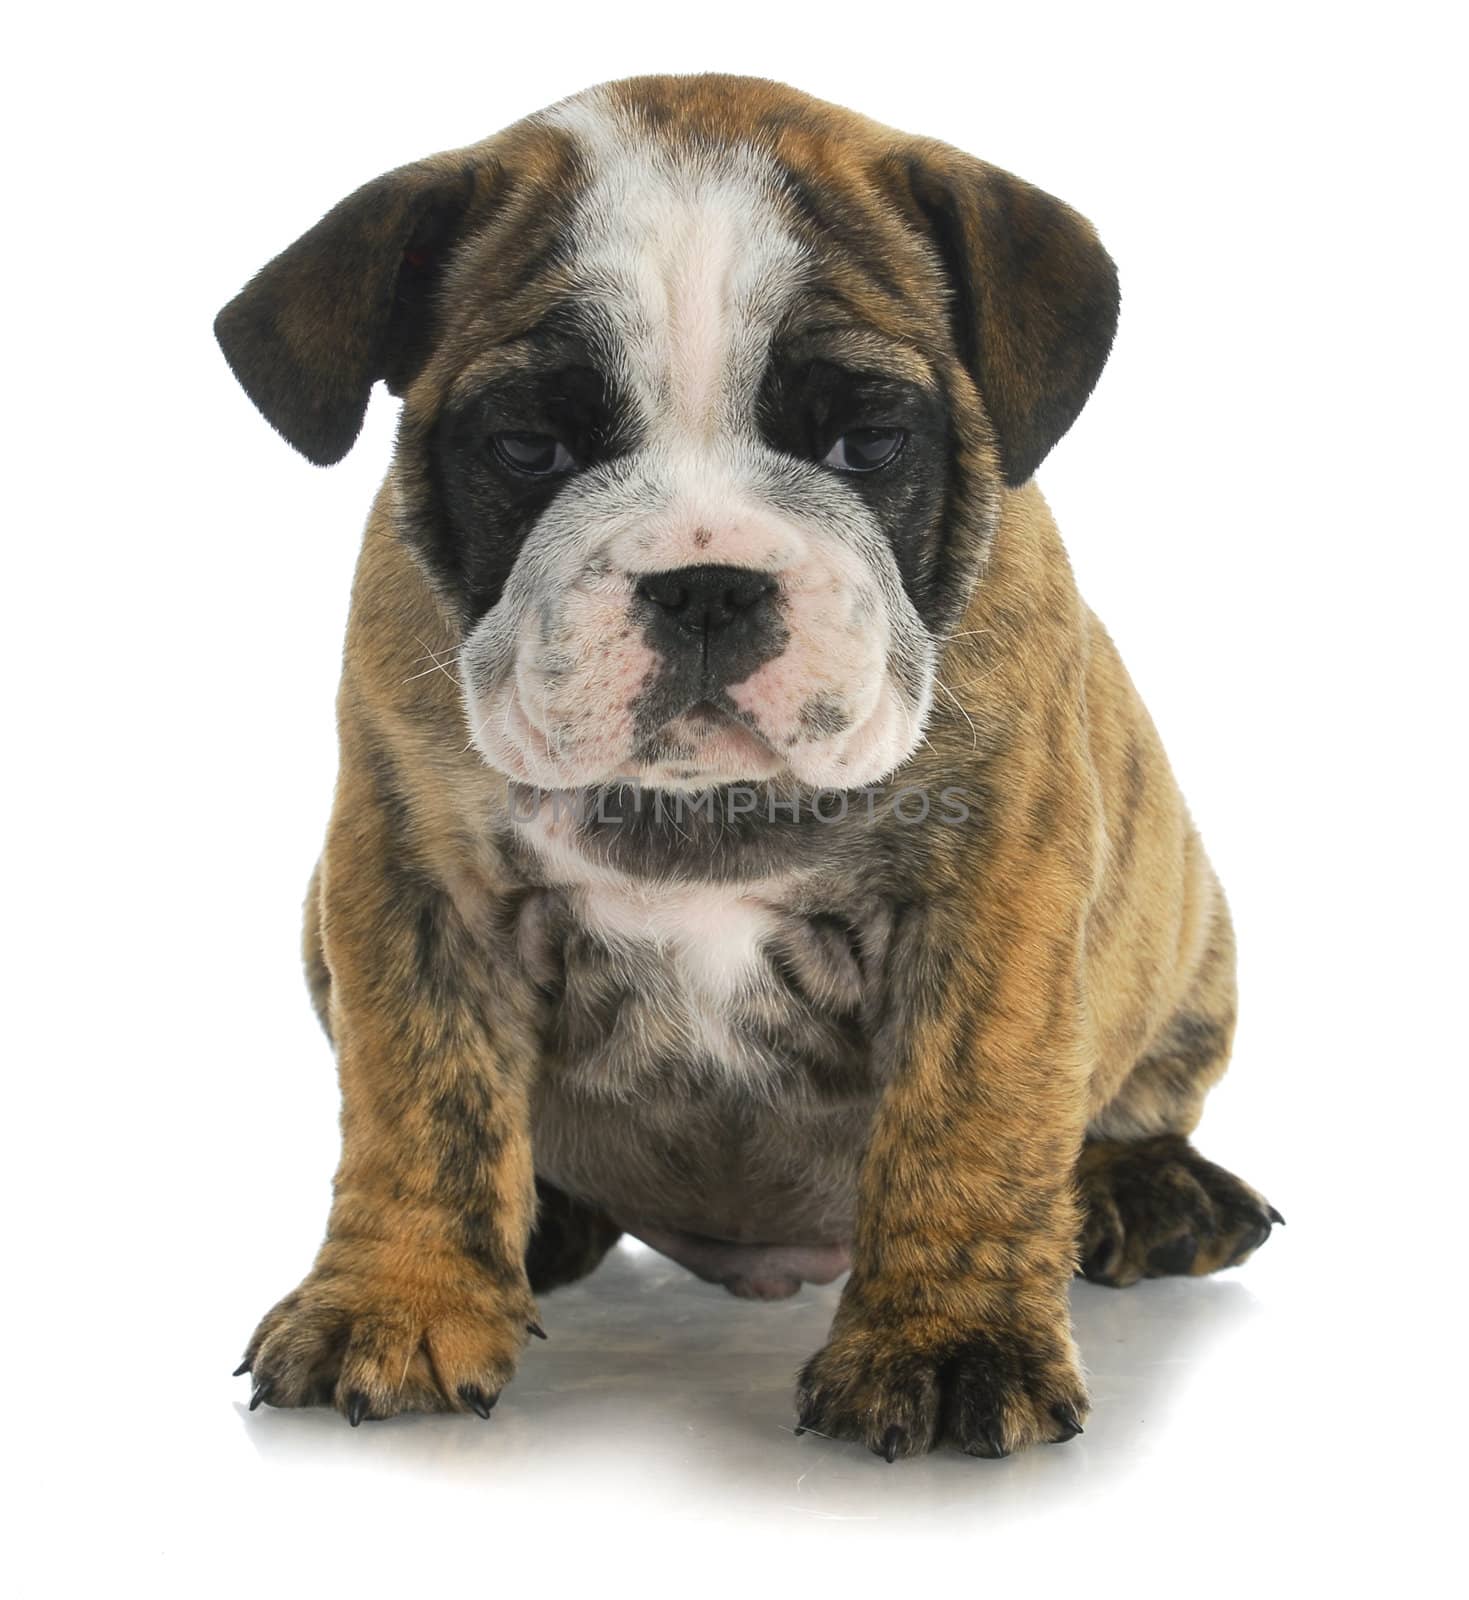 cute puppy - bulldog sitting on white background - 8 weeks old